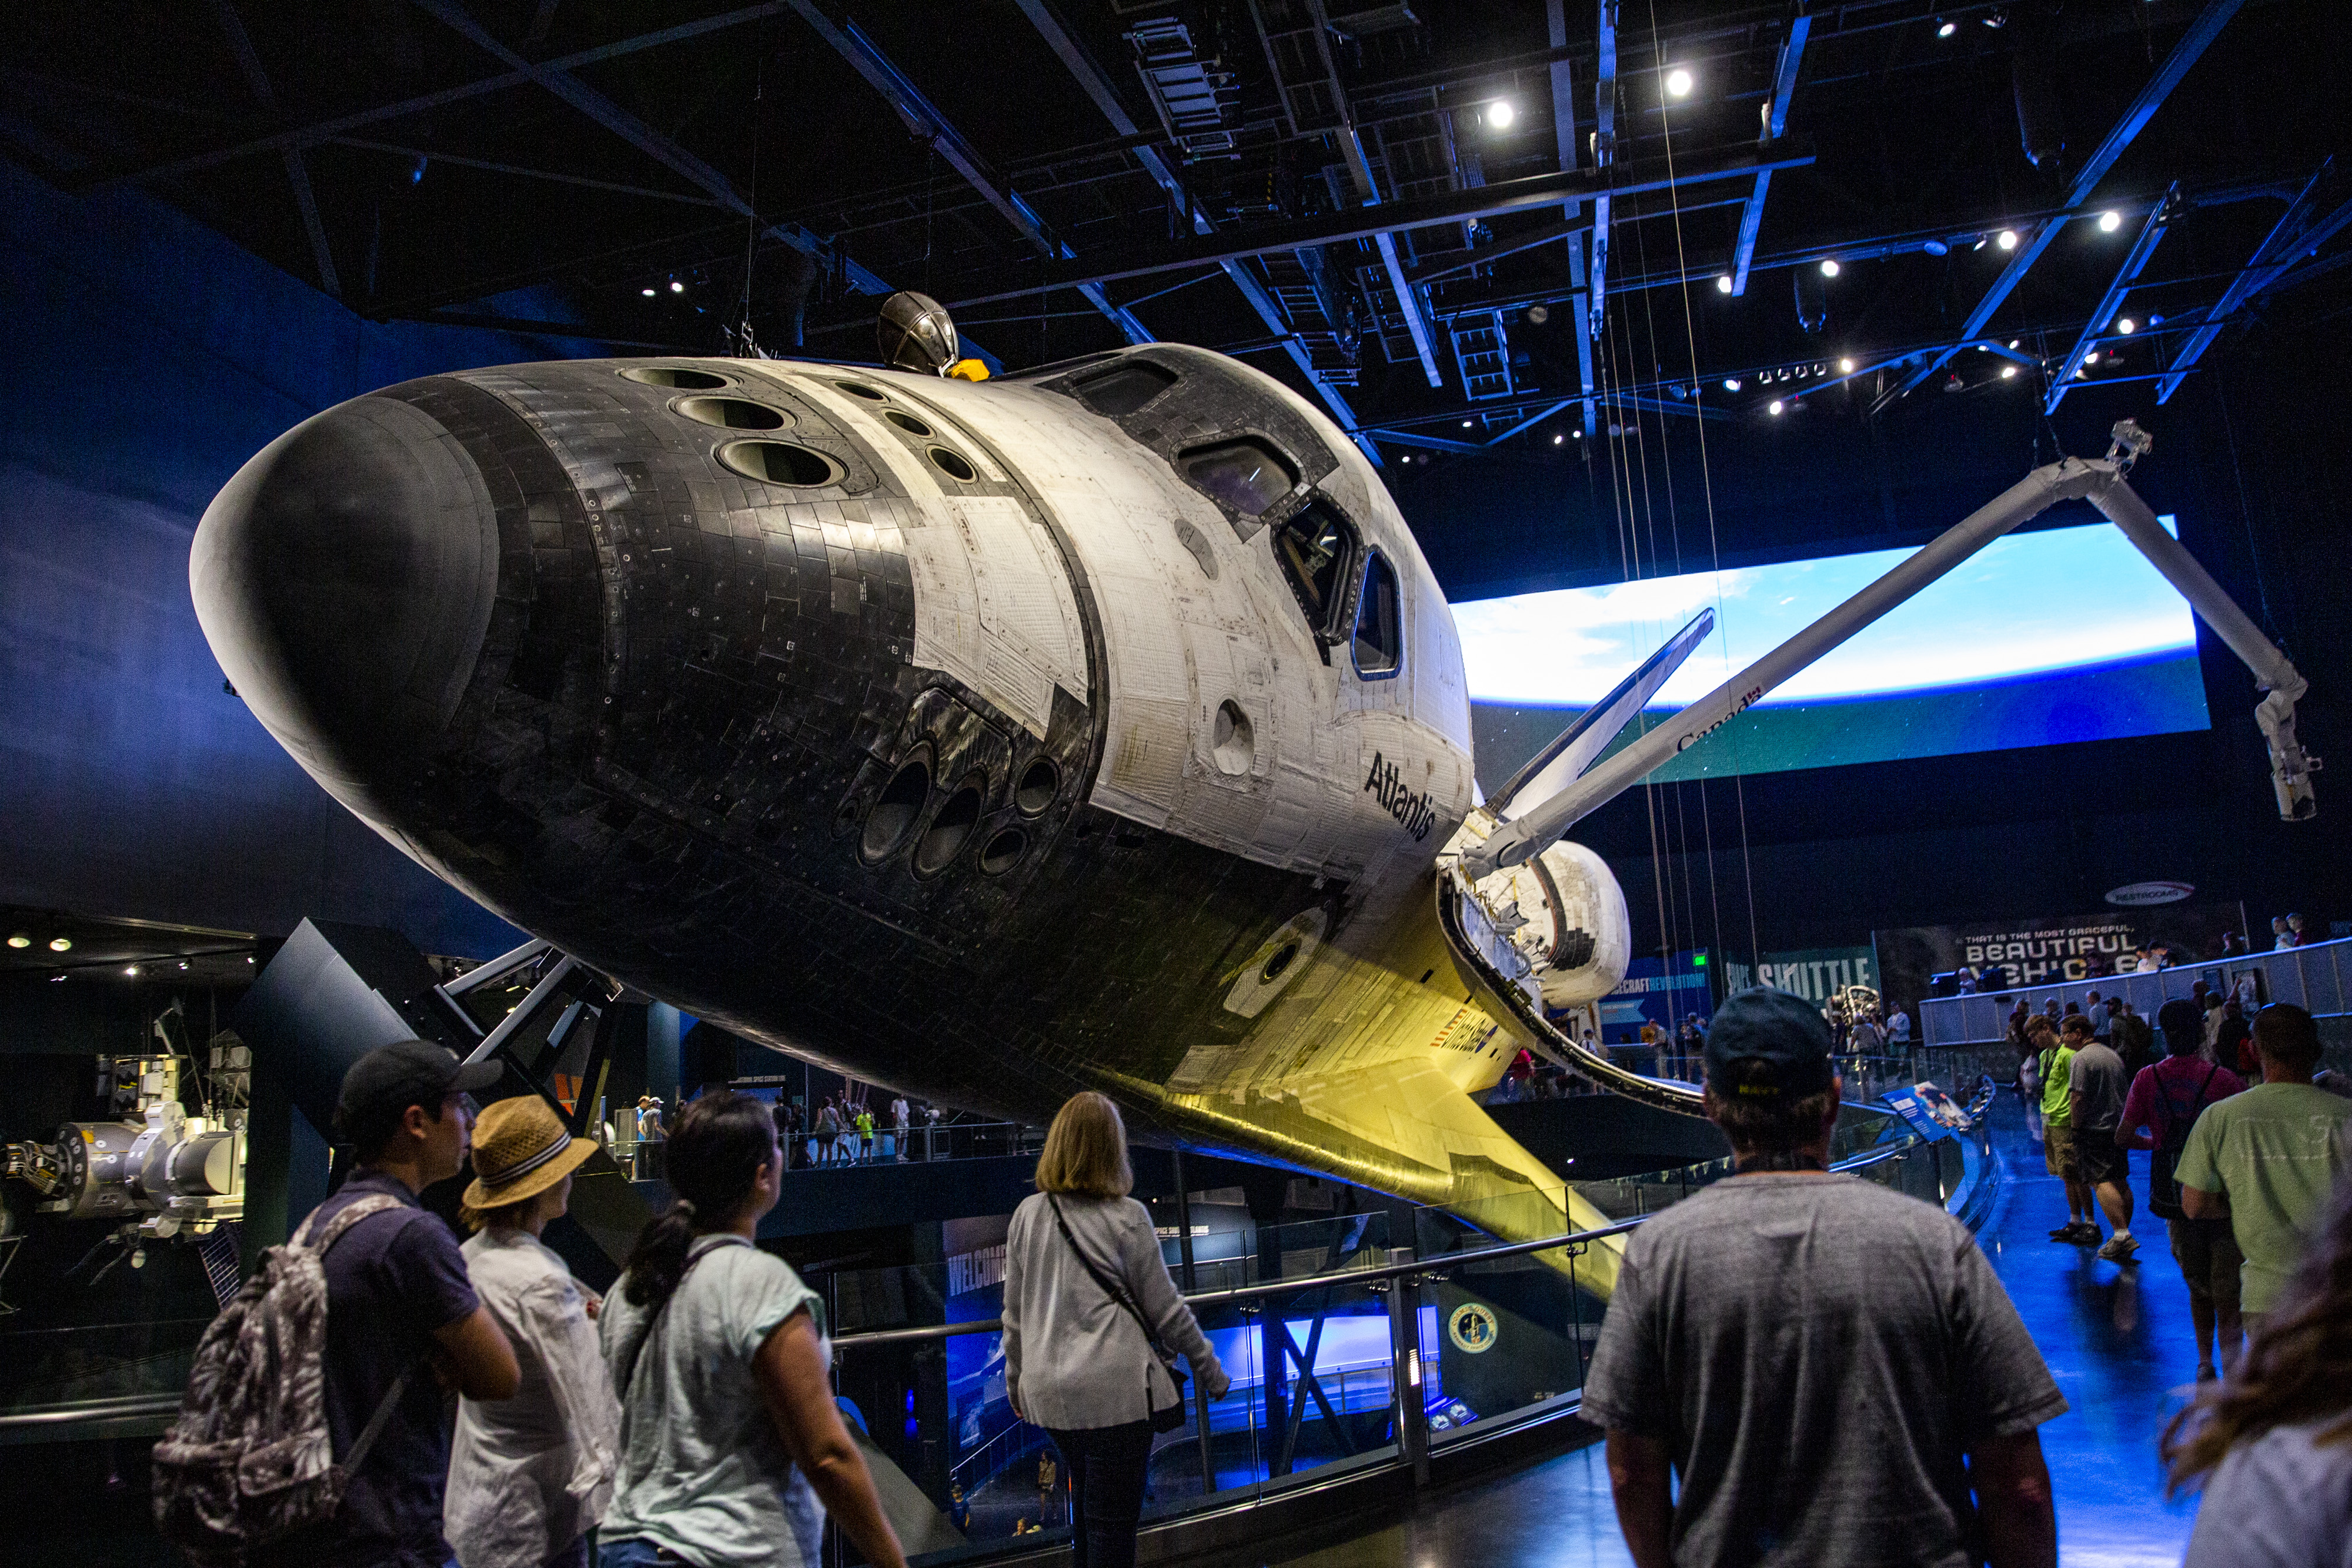 Space Shuttle Atlantis is on display at Kennedy Space Center on Wednesday, March 13, 2019. (Patrick Connolly/Orlando Sentinel)